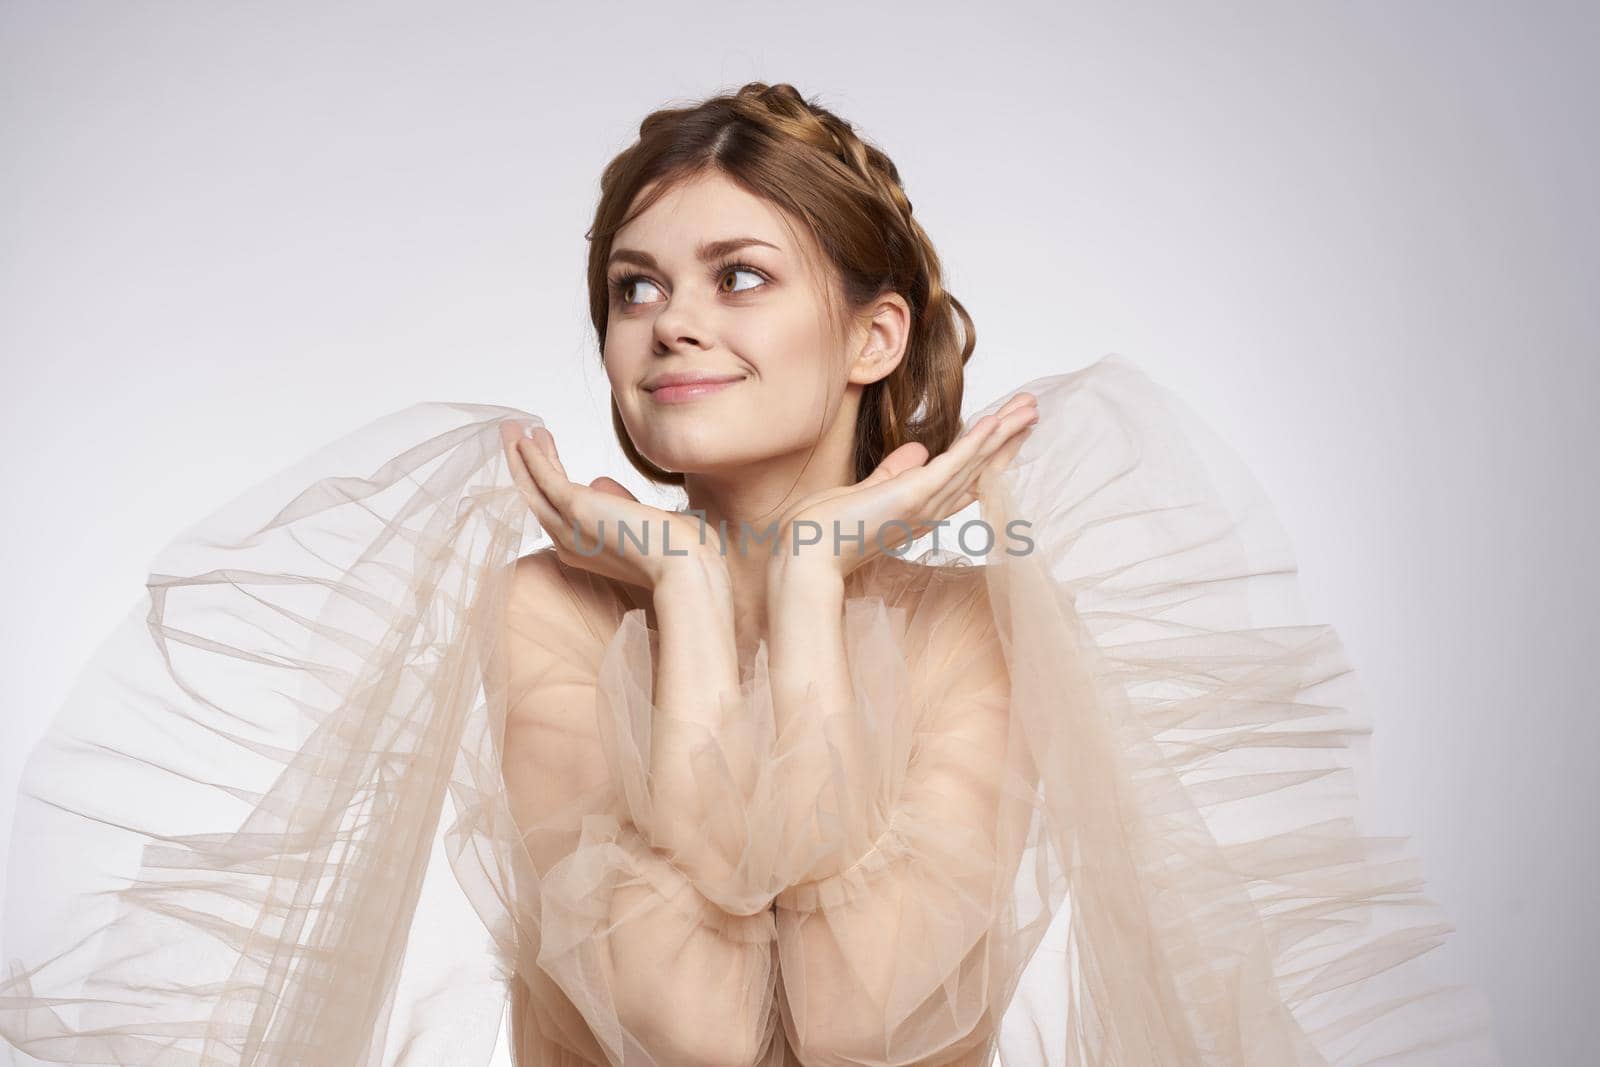 pretty woman gesture hands cosmetics fashion hairstyle posing light background. High quality photo